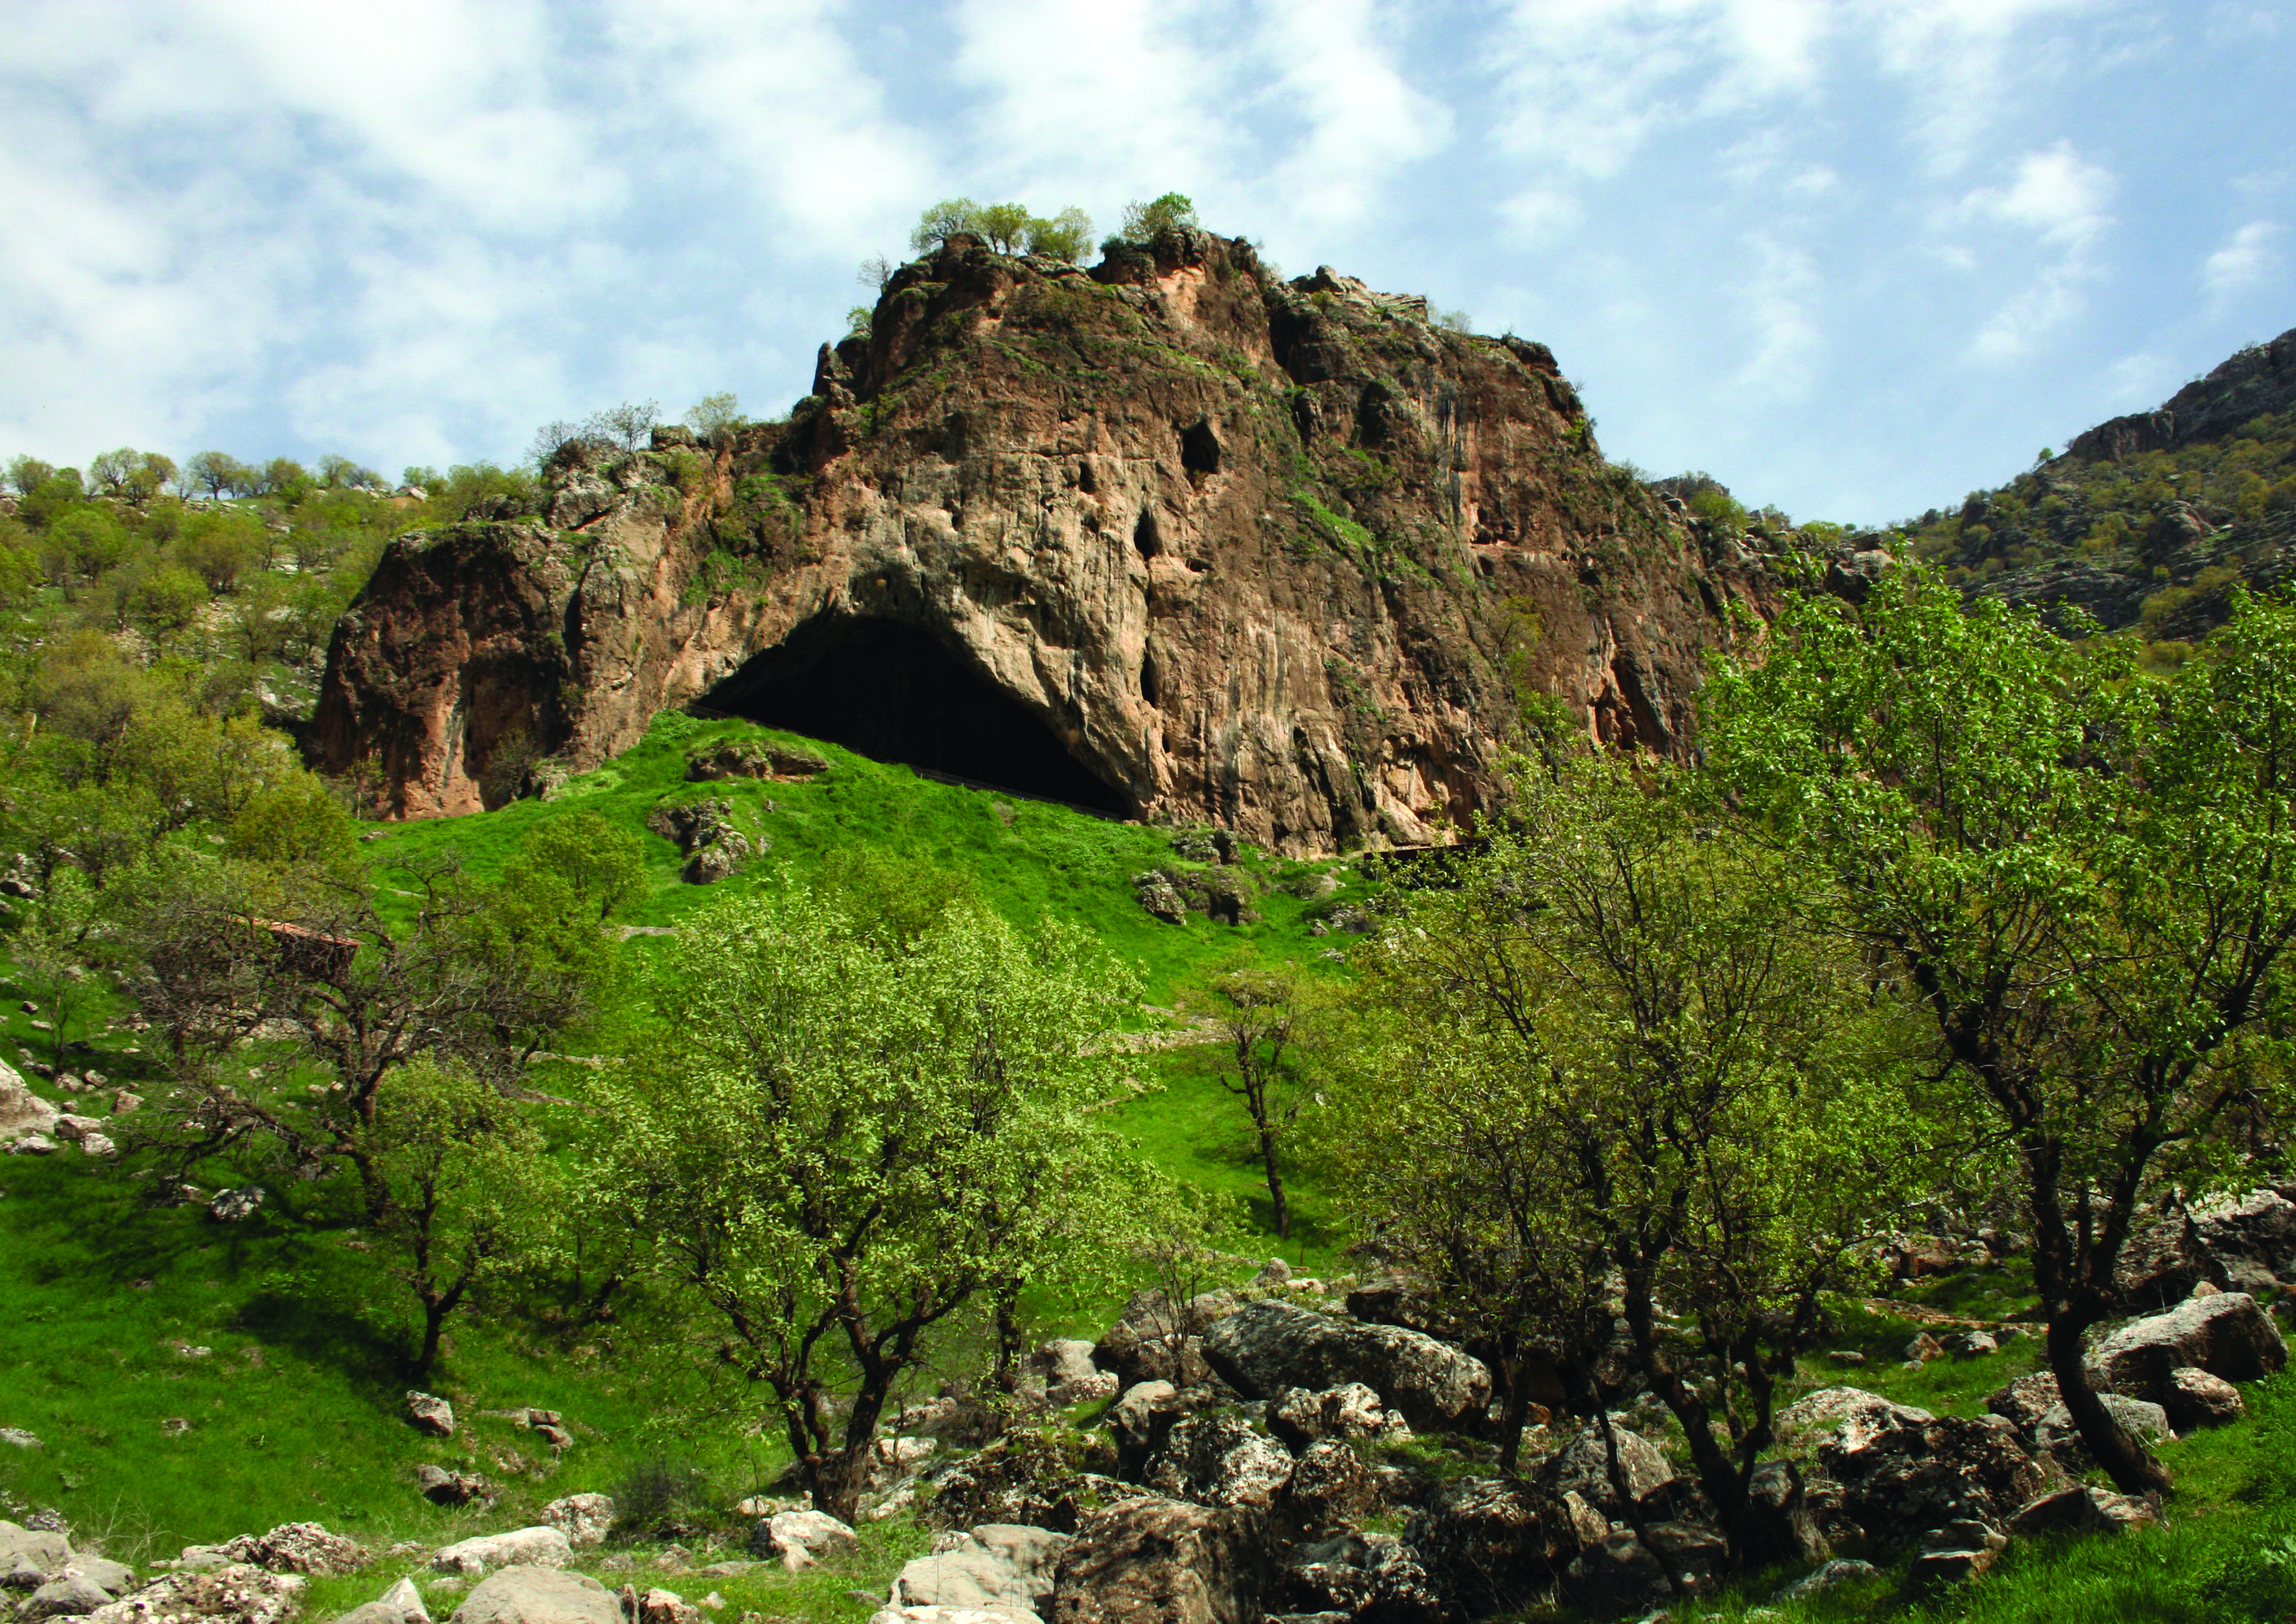 View of the entrance to Shanidar Cave. (Graeme Barker/ PA)